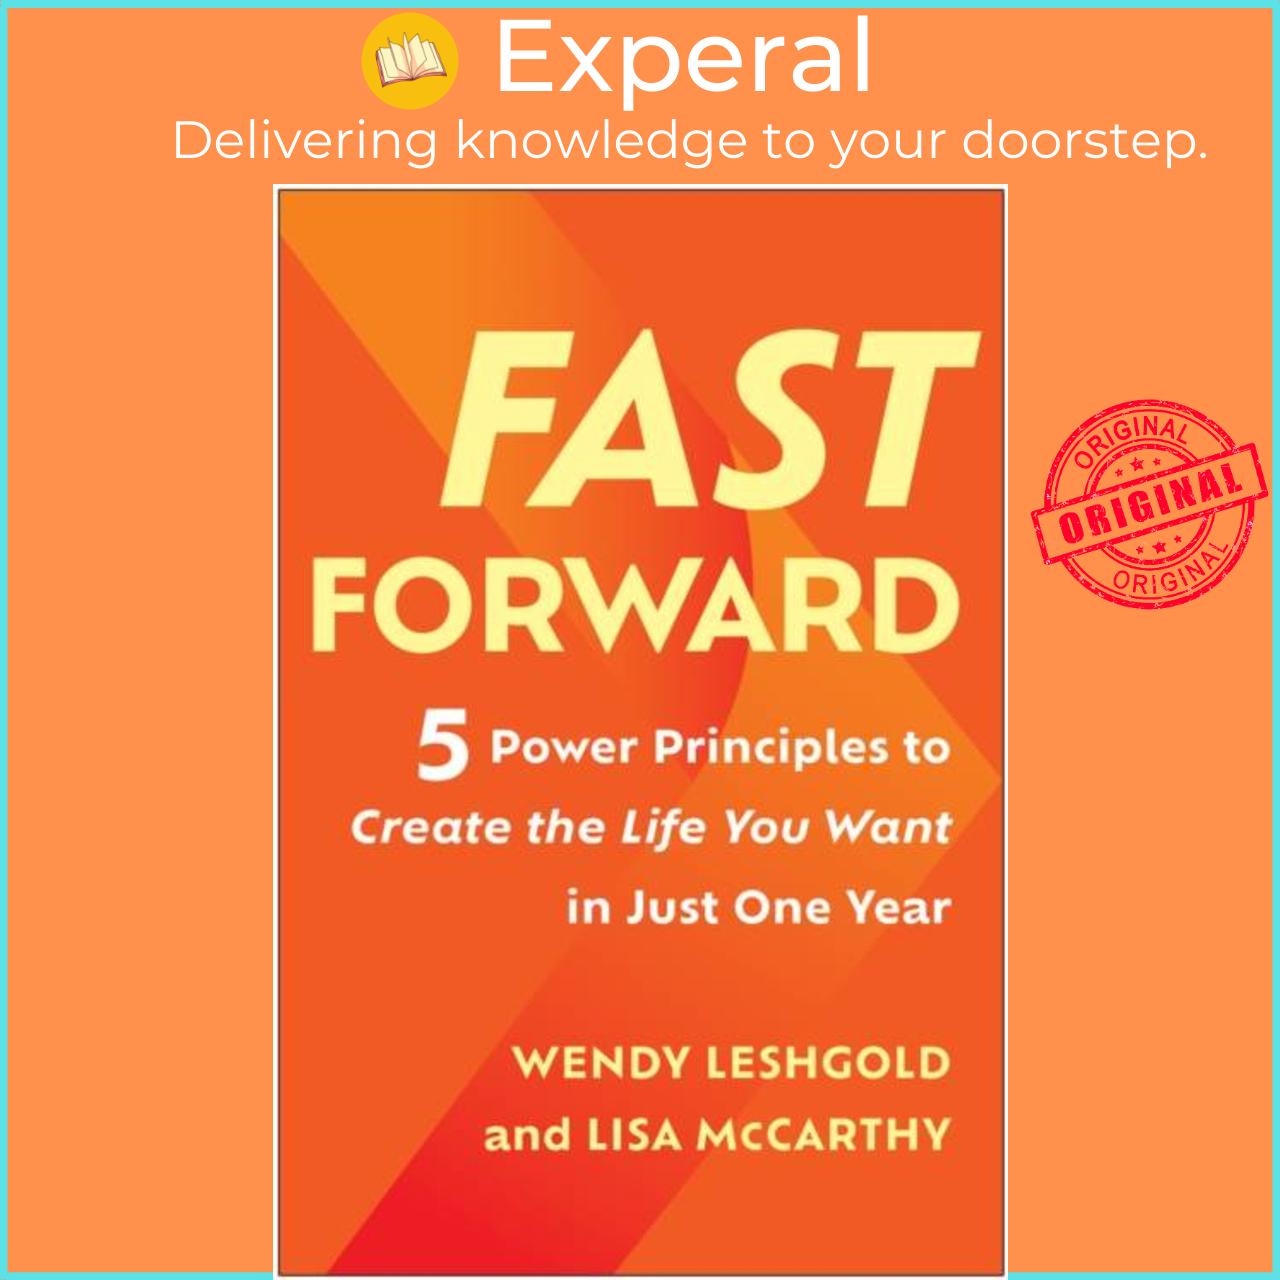 Sách - Fast Forward - 5 Power Principles to Create the Life You Want in Just O by Wendy Leshgold (UK edition, hardcover)